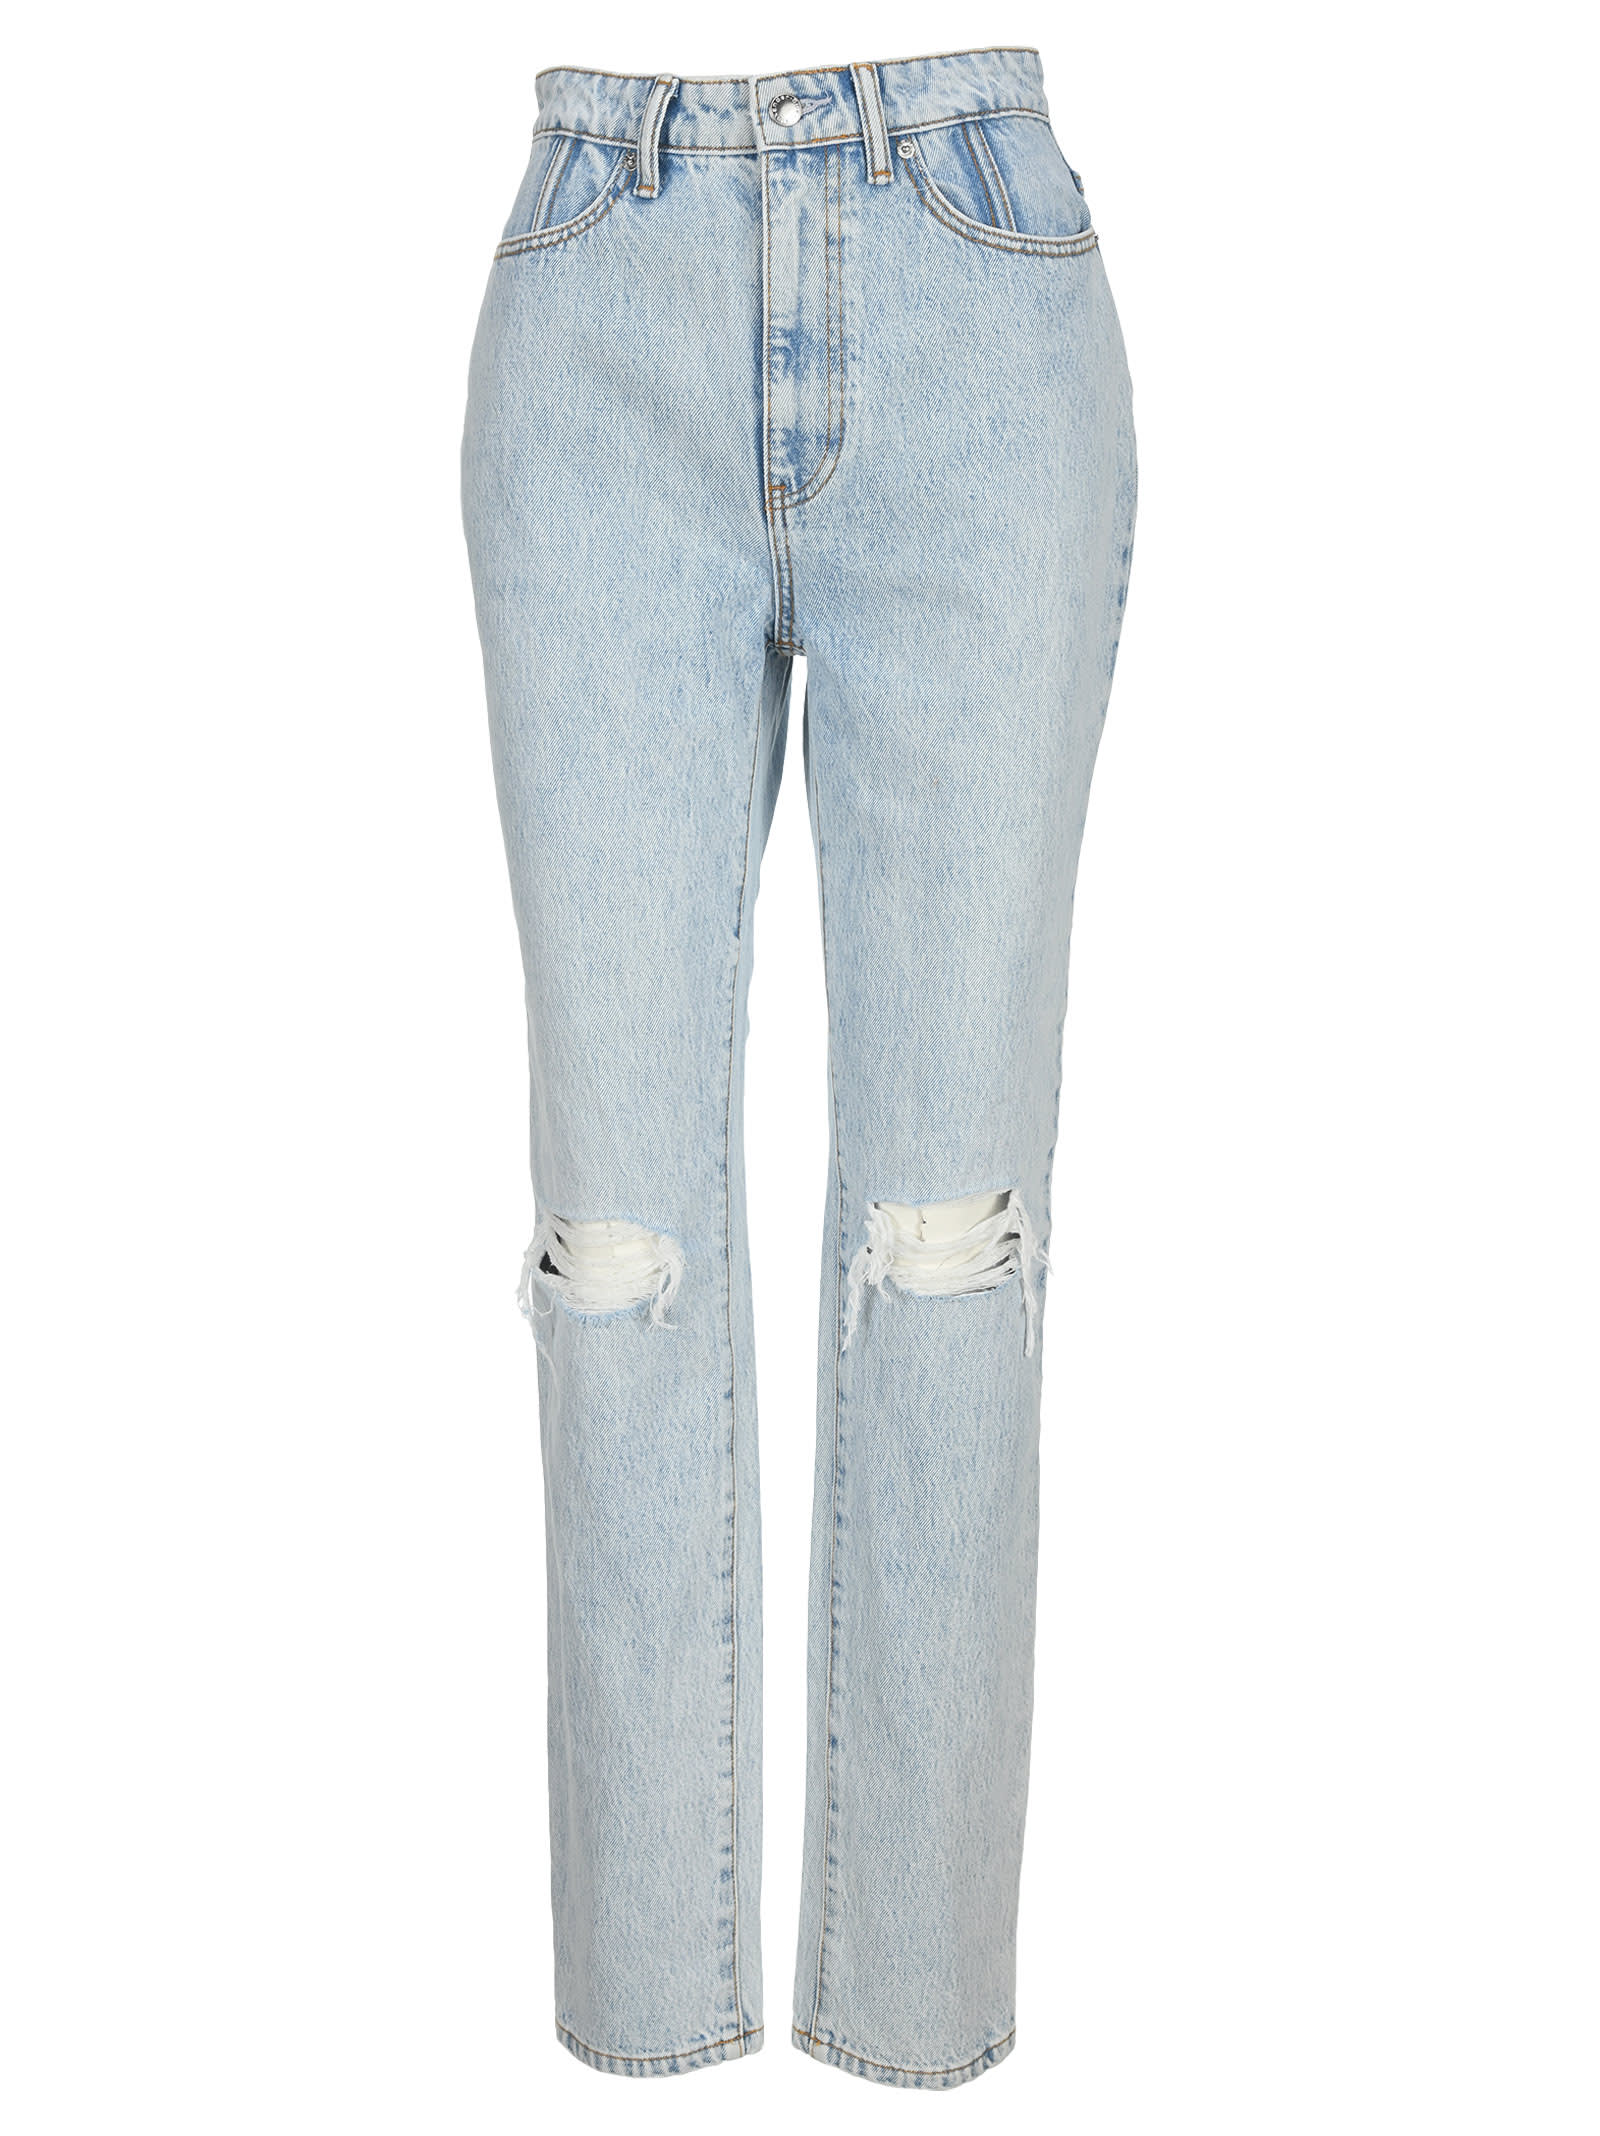 Alexander Wang Stacked Jeans